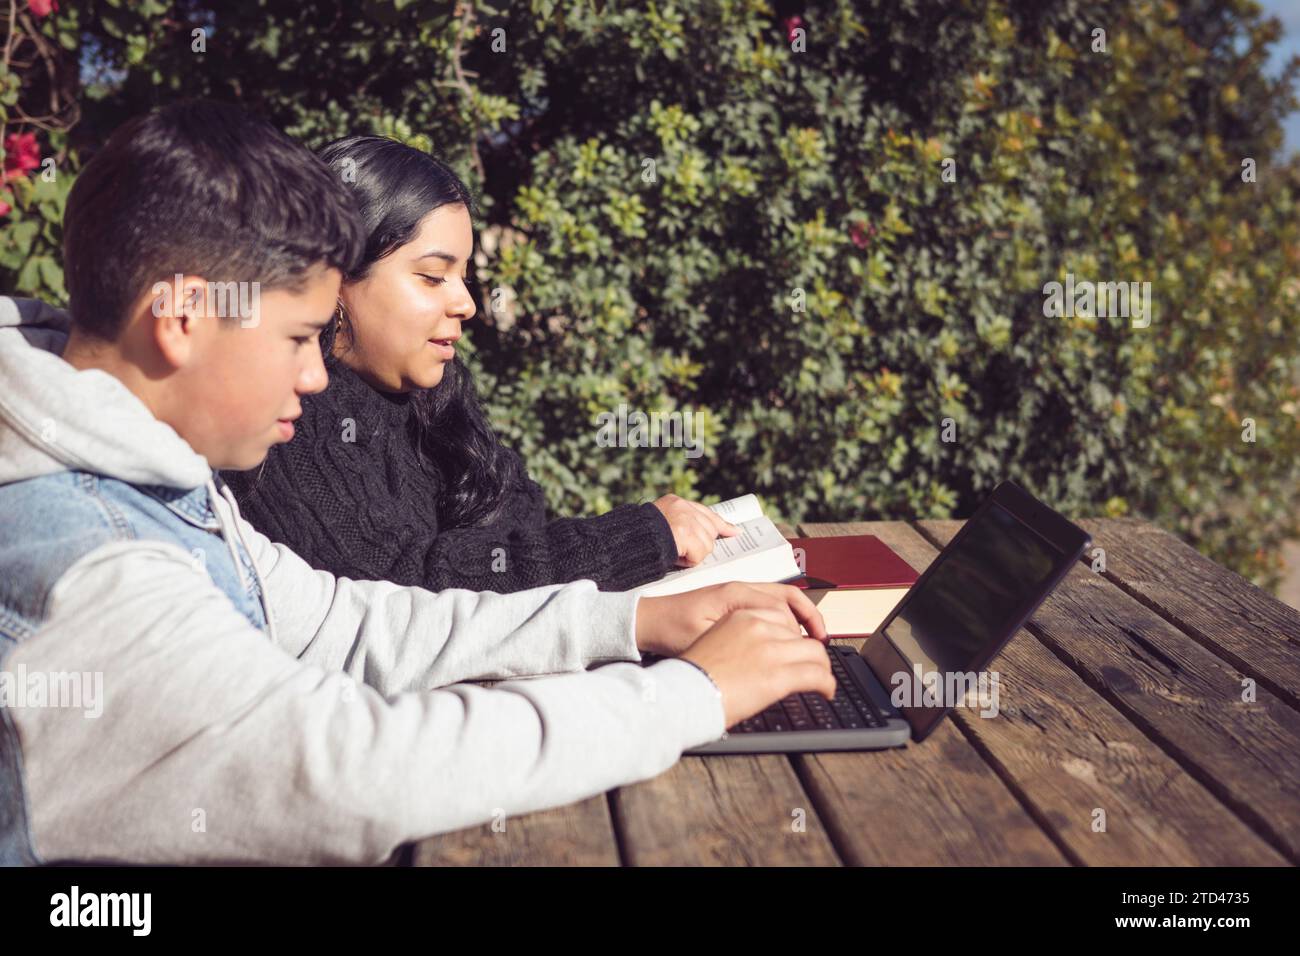 Two children studying with a laptop and books on a wooden table outdoors on a sunny day Stock Photo